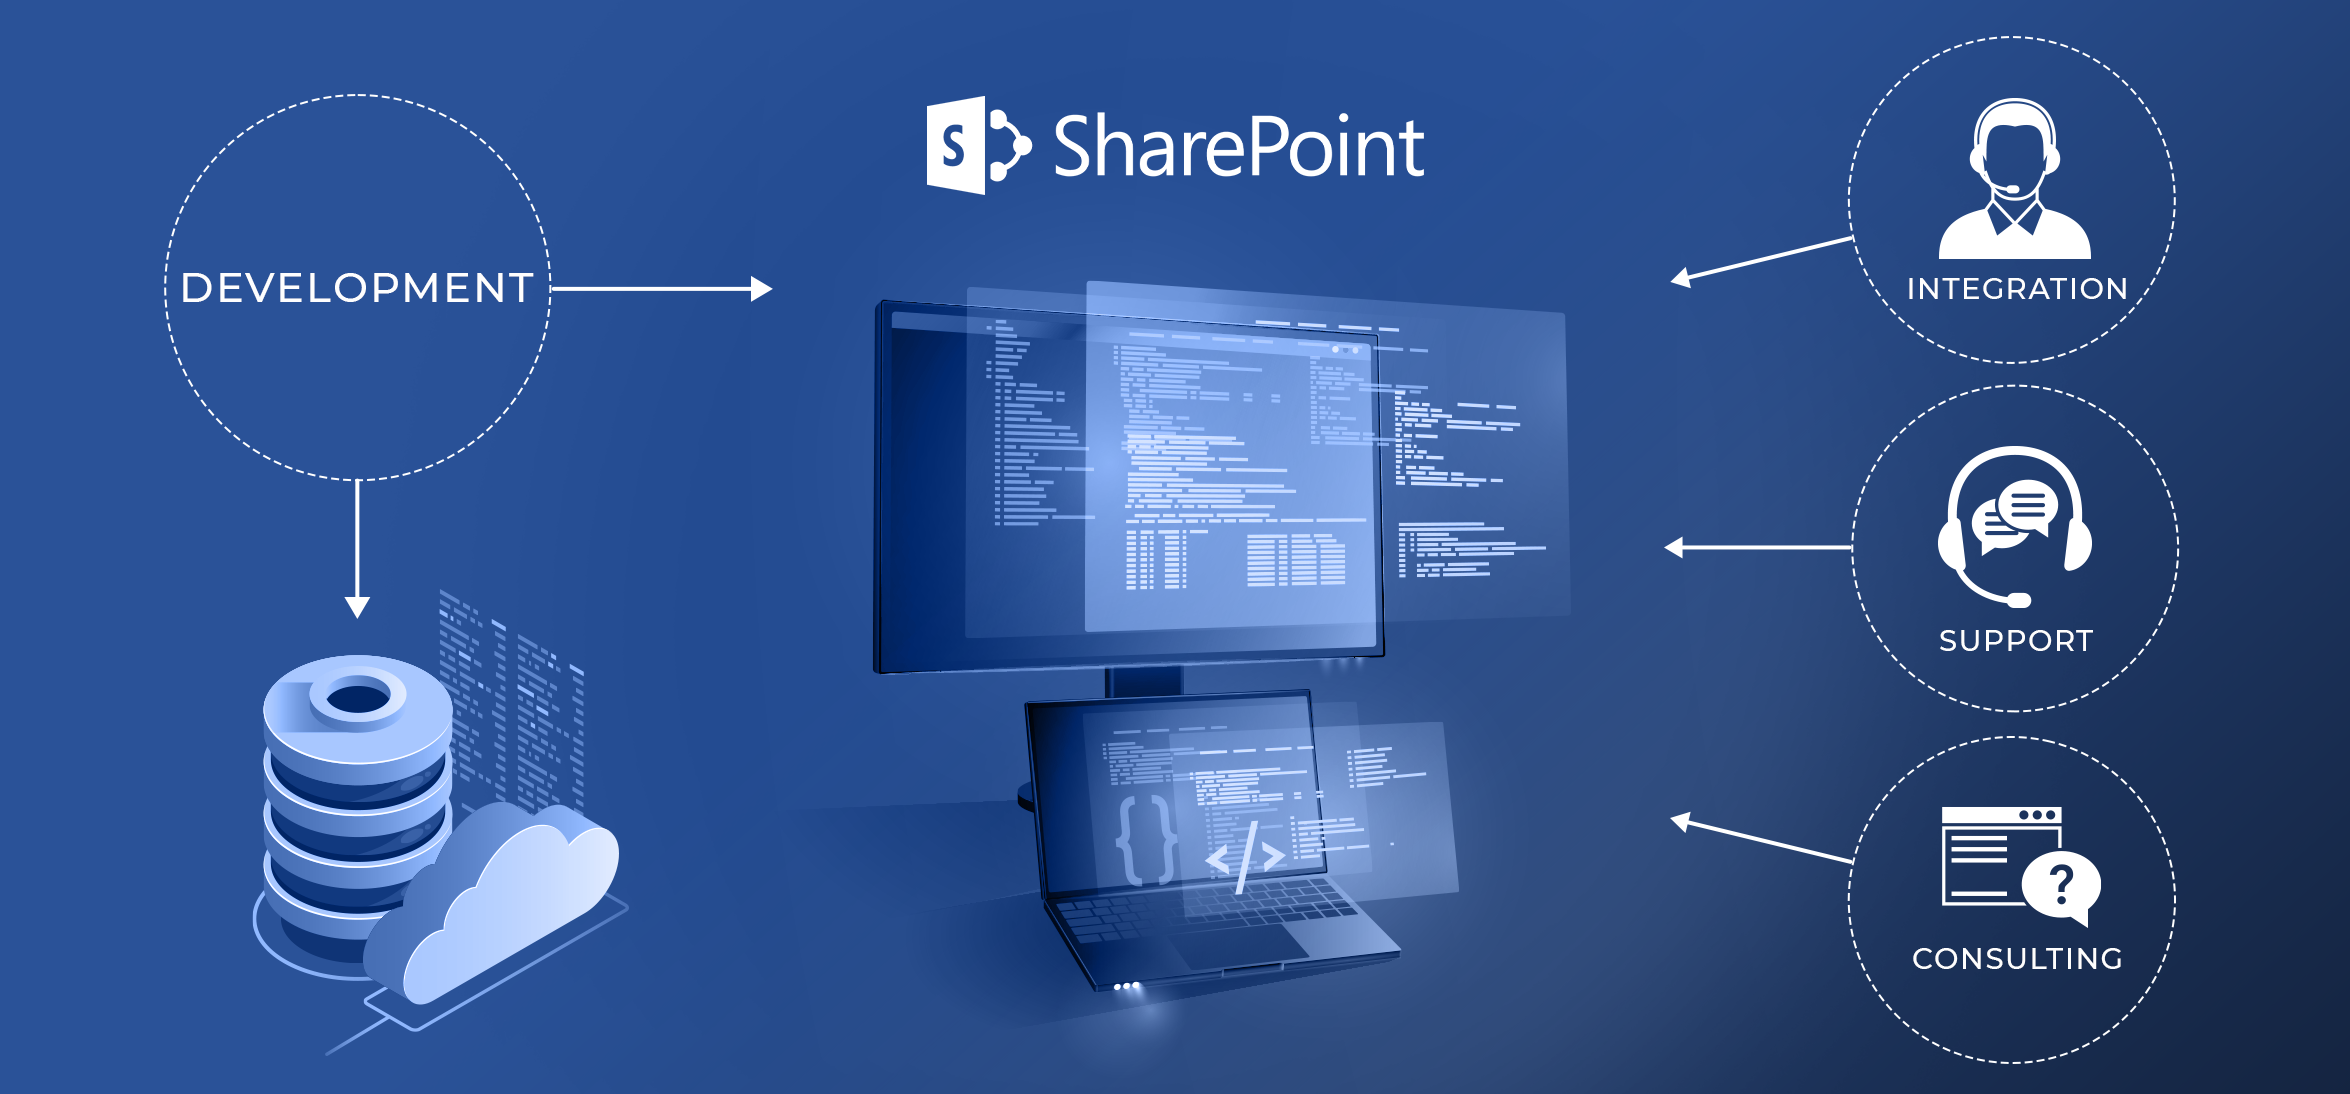 Microsoft Share Point Consult